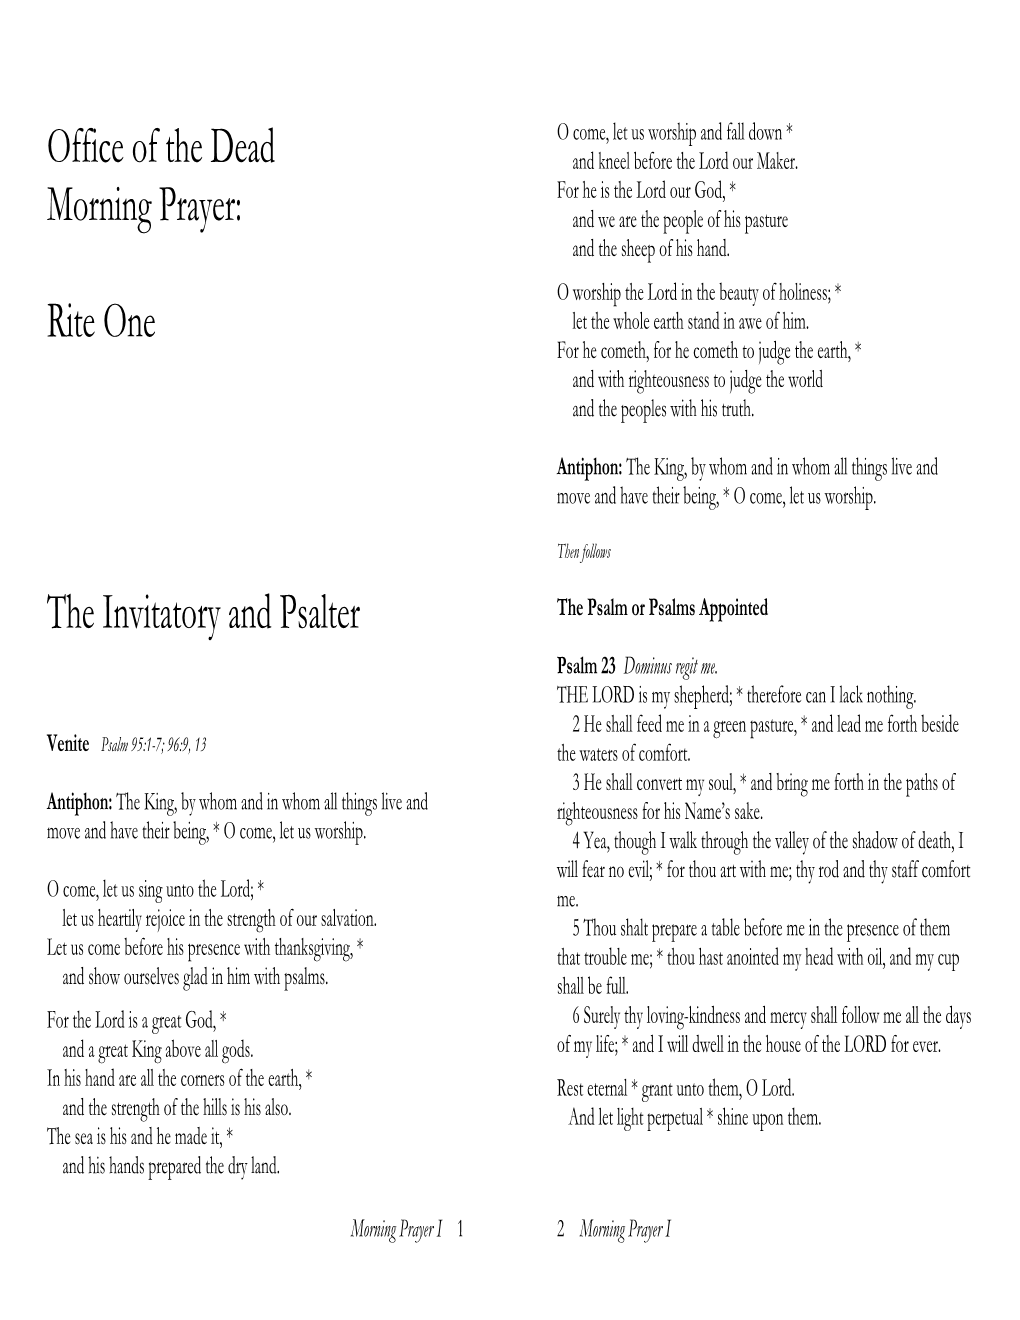 Office of the Dead Morning Prayer: Rite One the Invitatory and Psalter